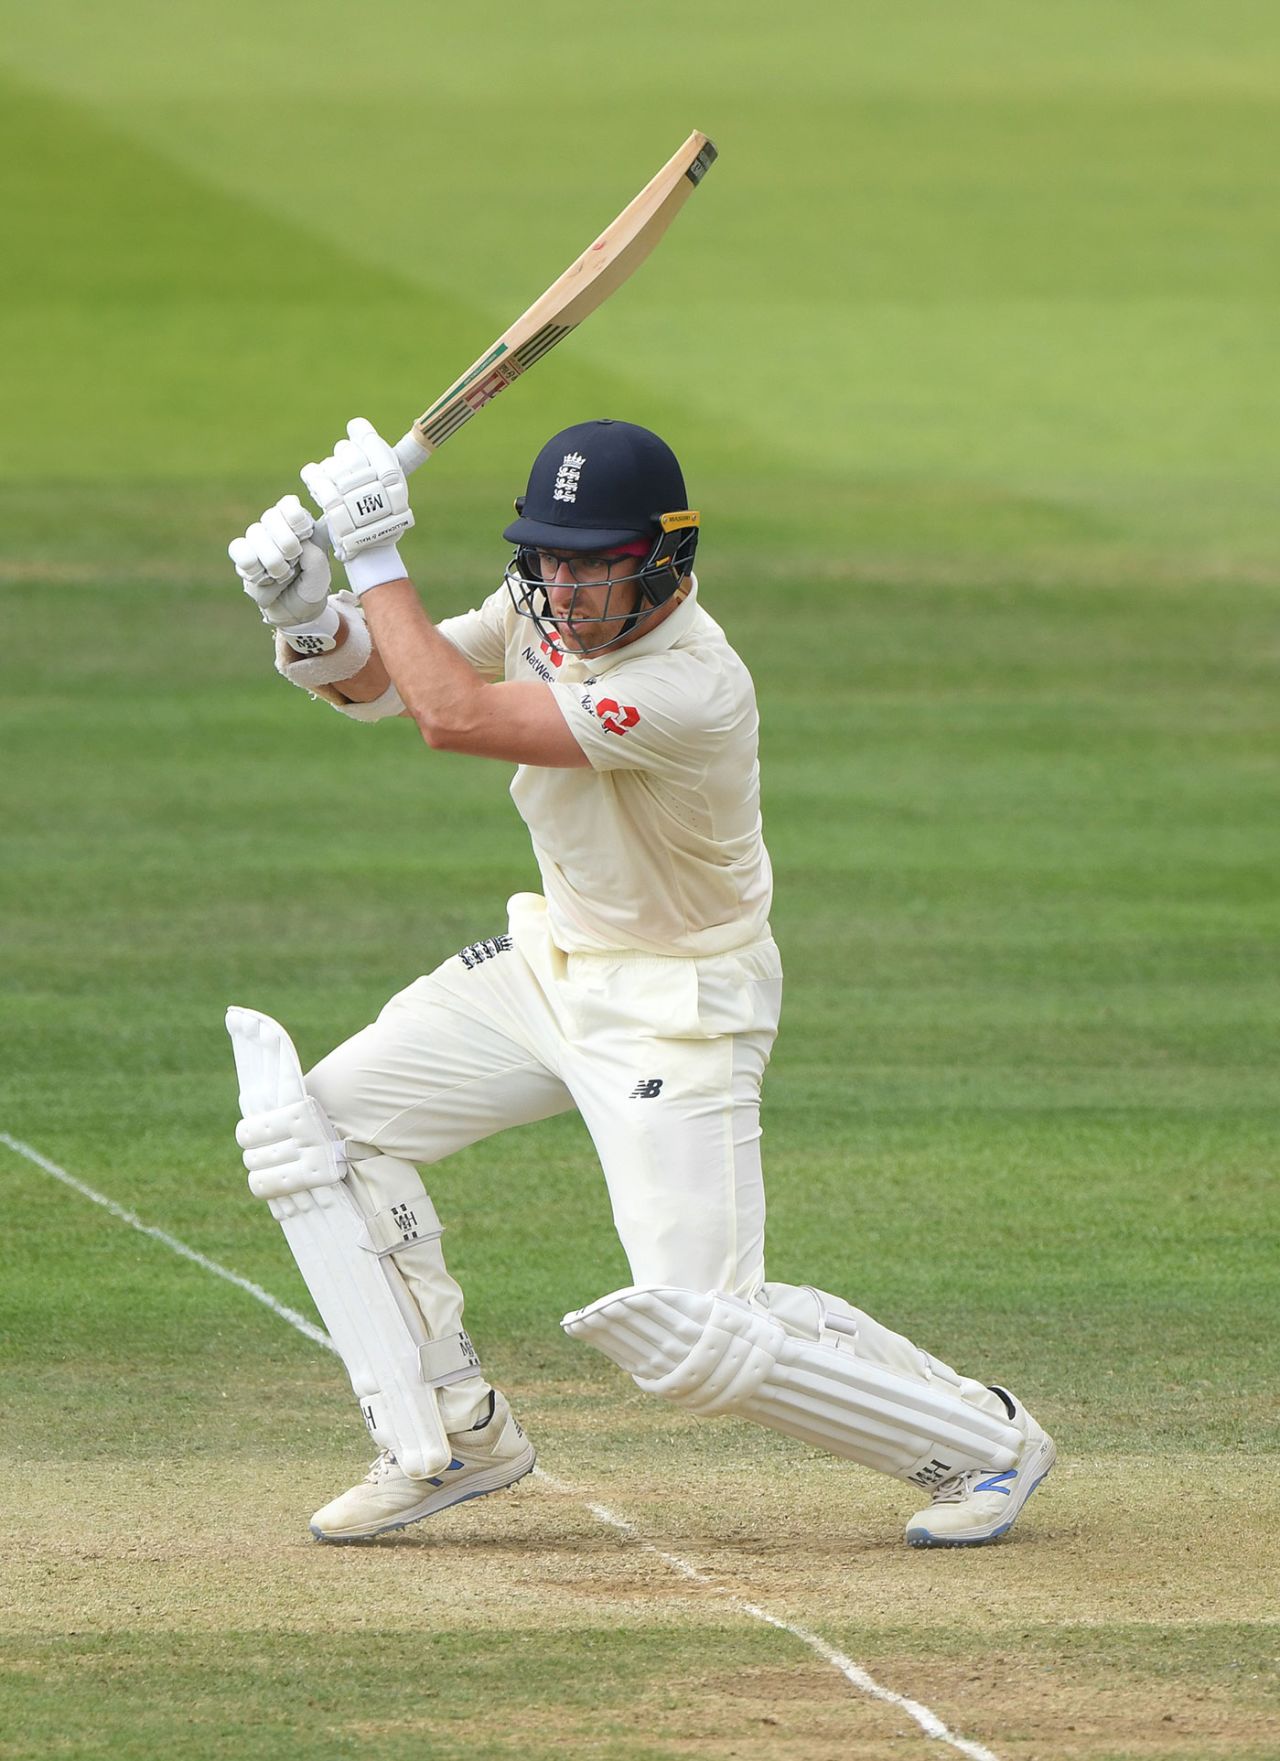 Jack Leach drives through the covers, England v Ireland, Only Test, 2nd day, July 25, 2019